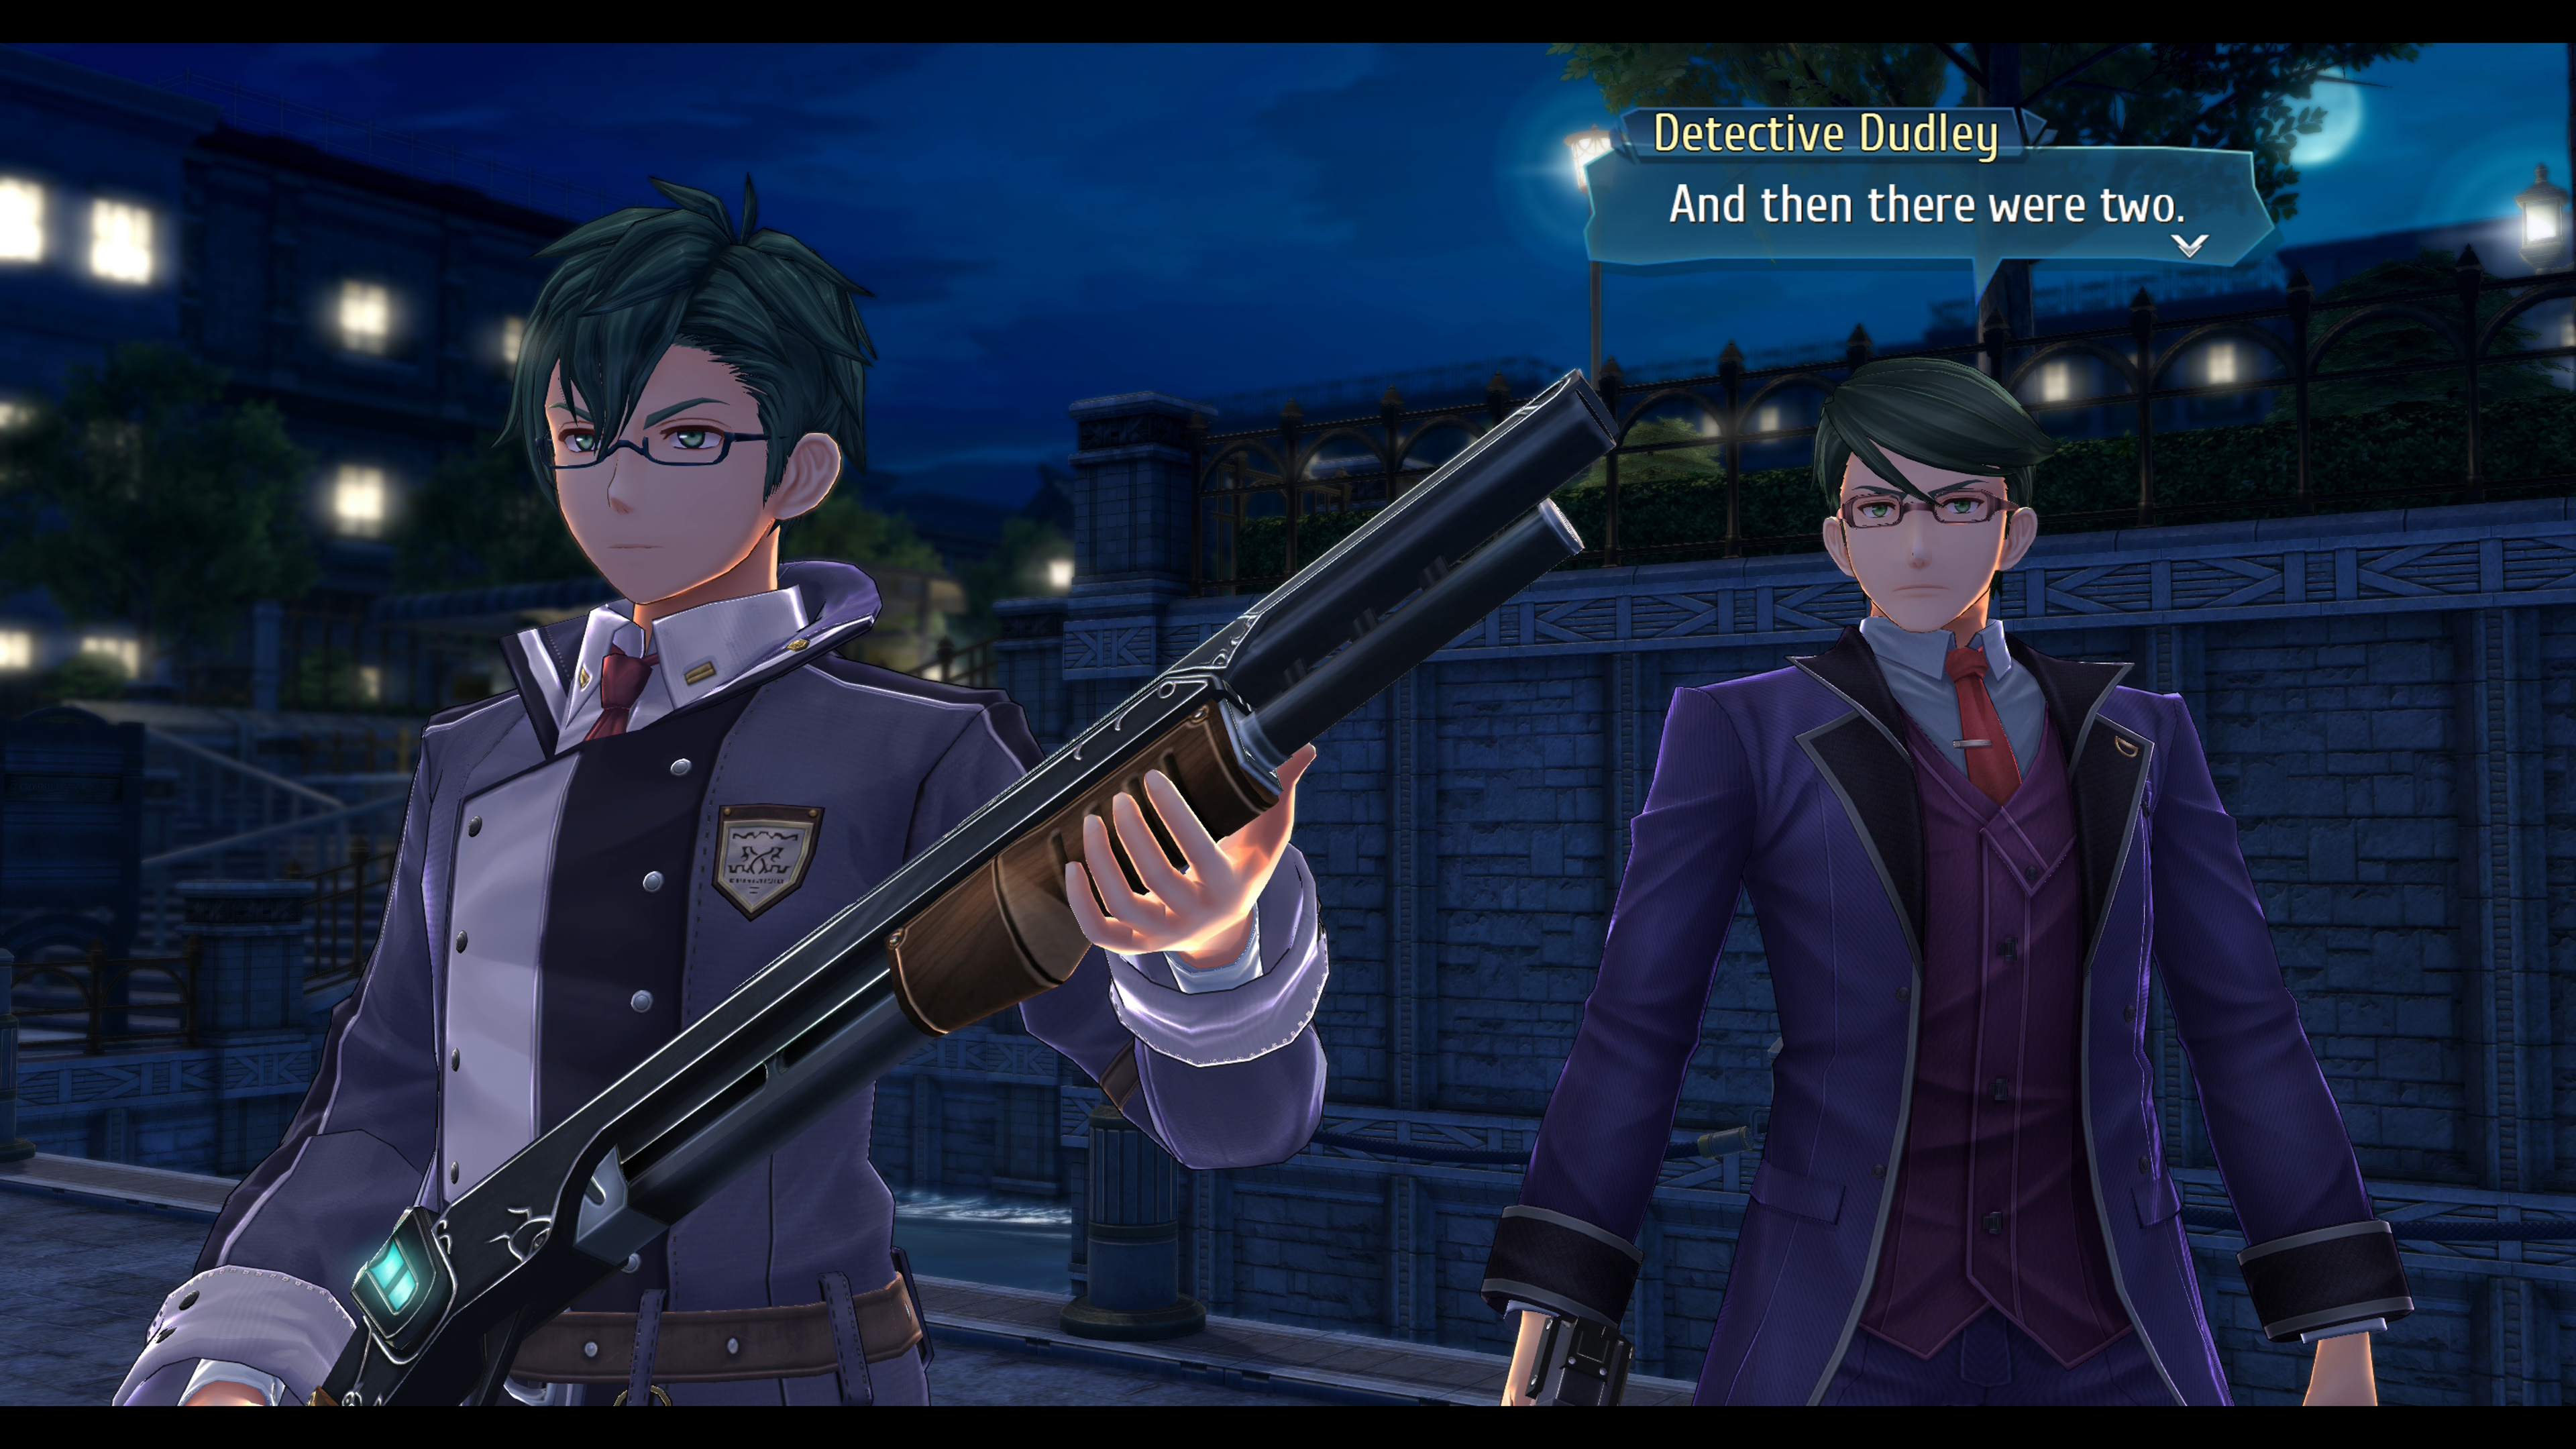 Trails into Reverie review: Two anime men with green hair, wearing dark jackets, are standing alongside a canal at night. One has a shotgun, and both wear glasses.